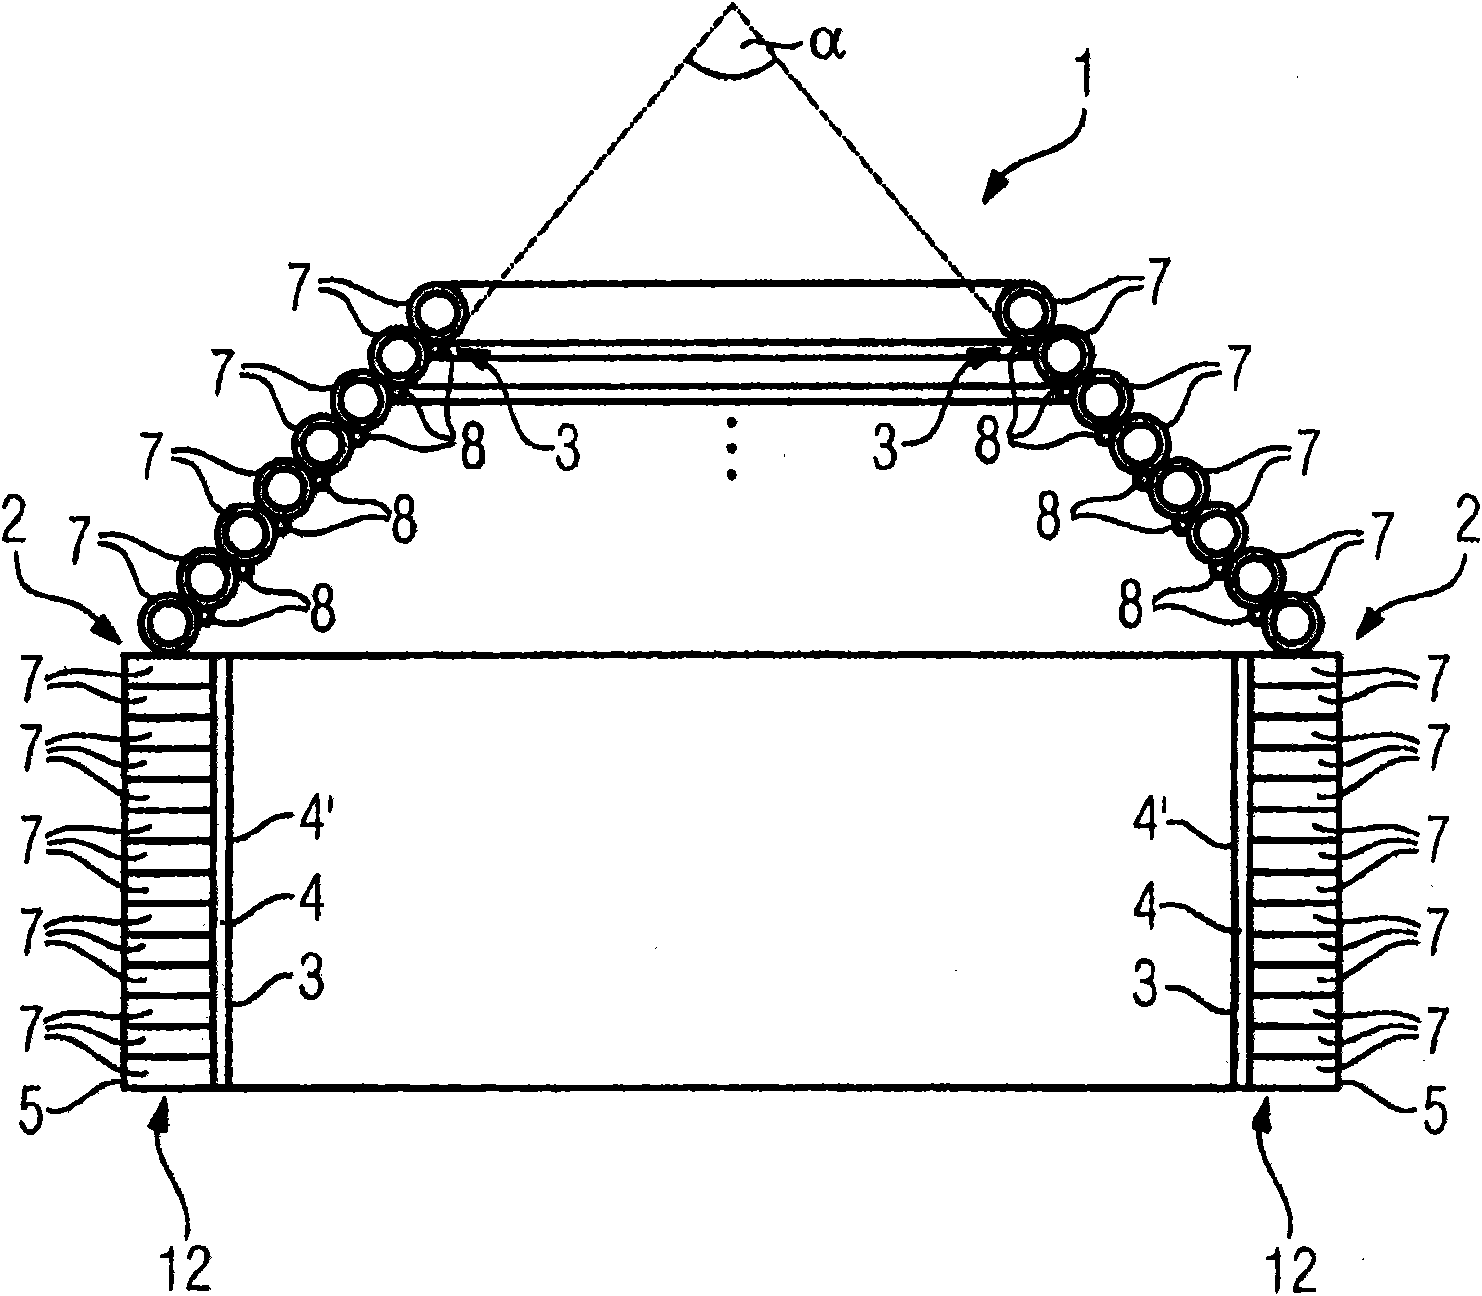 Cover for a furnace for receiving molten material, particularly metal, and furnace for receiving molten material